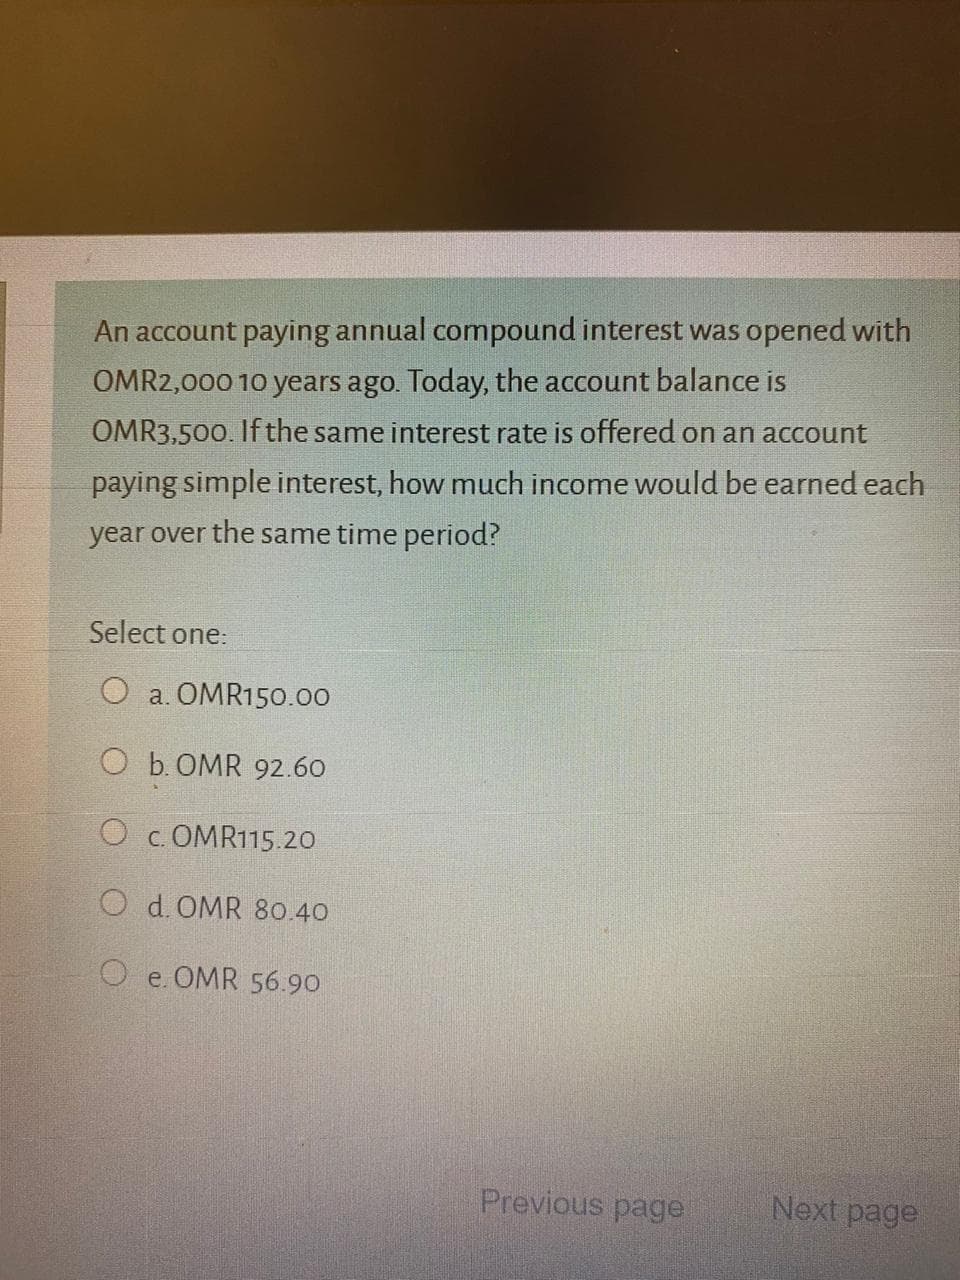 An account paying annual compound interest was opened with
OMR2,000 10 years ago. Today, the account balance is
OMR3,500. If the same interest rate is offered on an account
paying simple interest, how much income would be earned each
year over the same time period?
Select one:
O a. OMR150.00
O b. OMR 92.60
c. OMR115.20
O d. OMR 80.40
O e. OMR 56.90
